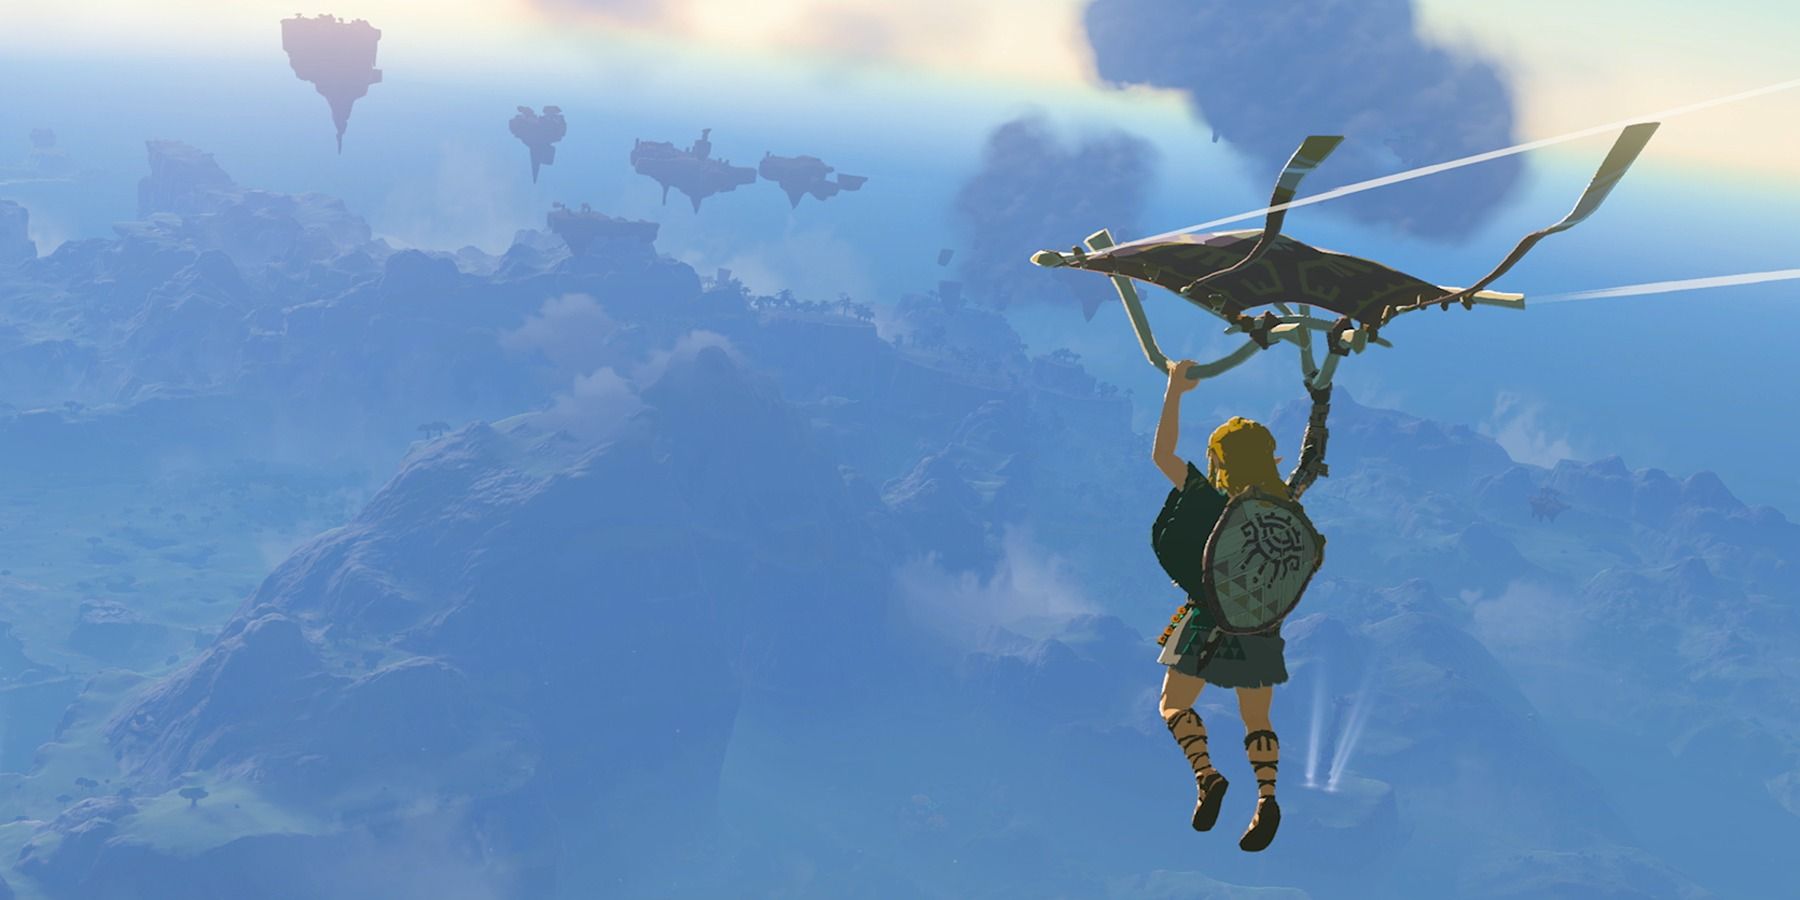 The paraglider is a crucial method of transportation for Link. Make it harder on him by refusing to use it.